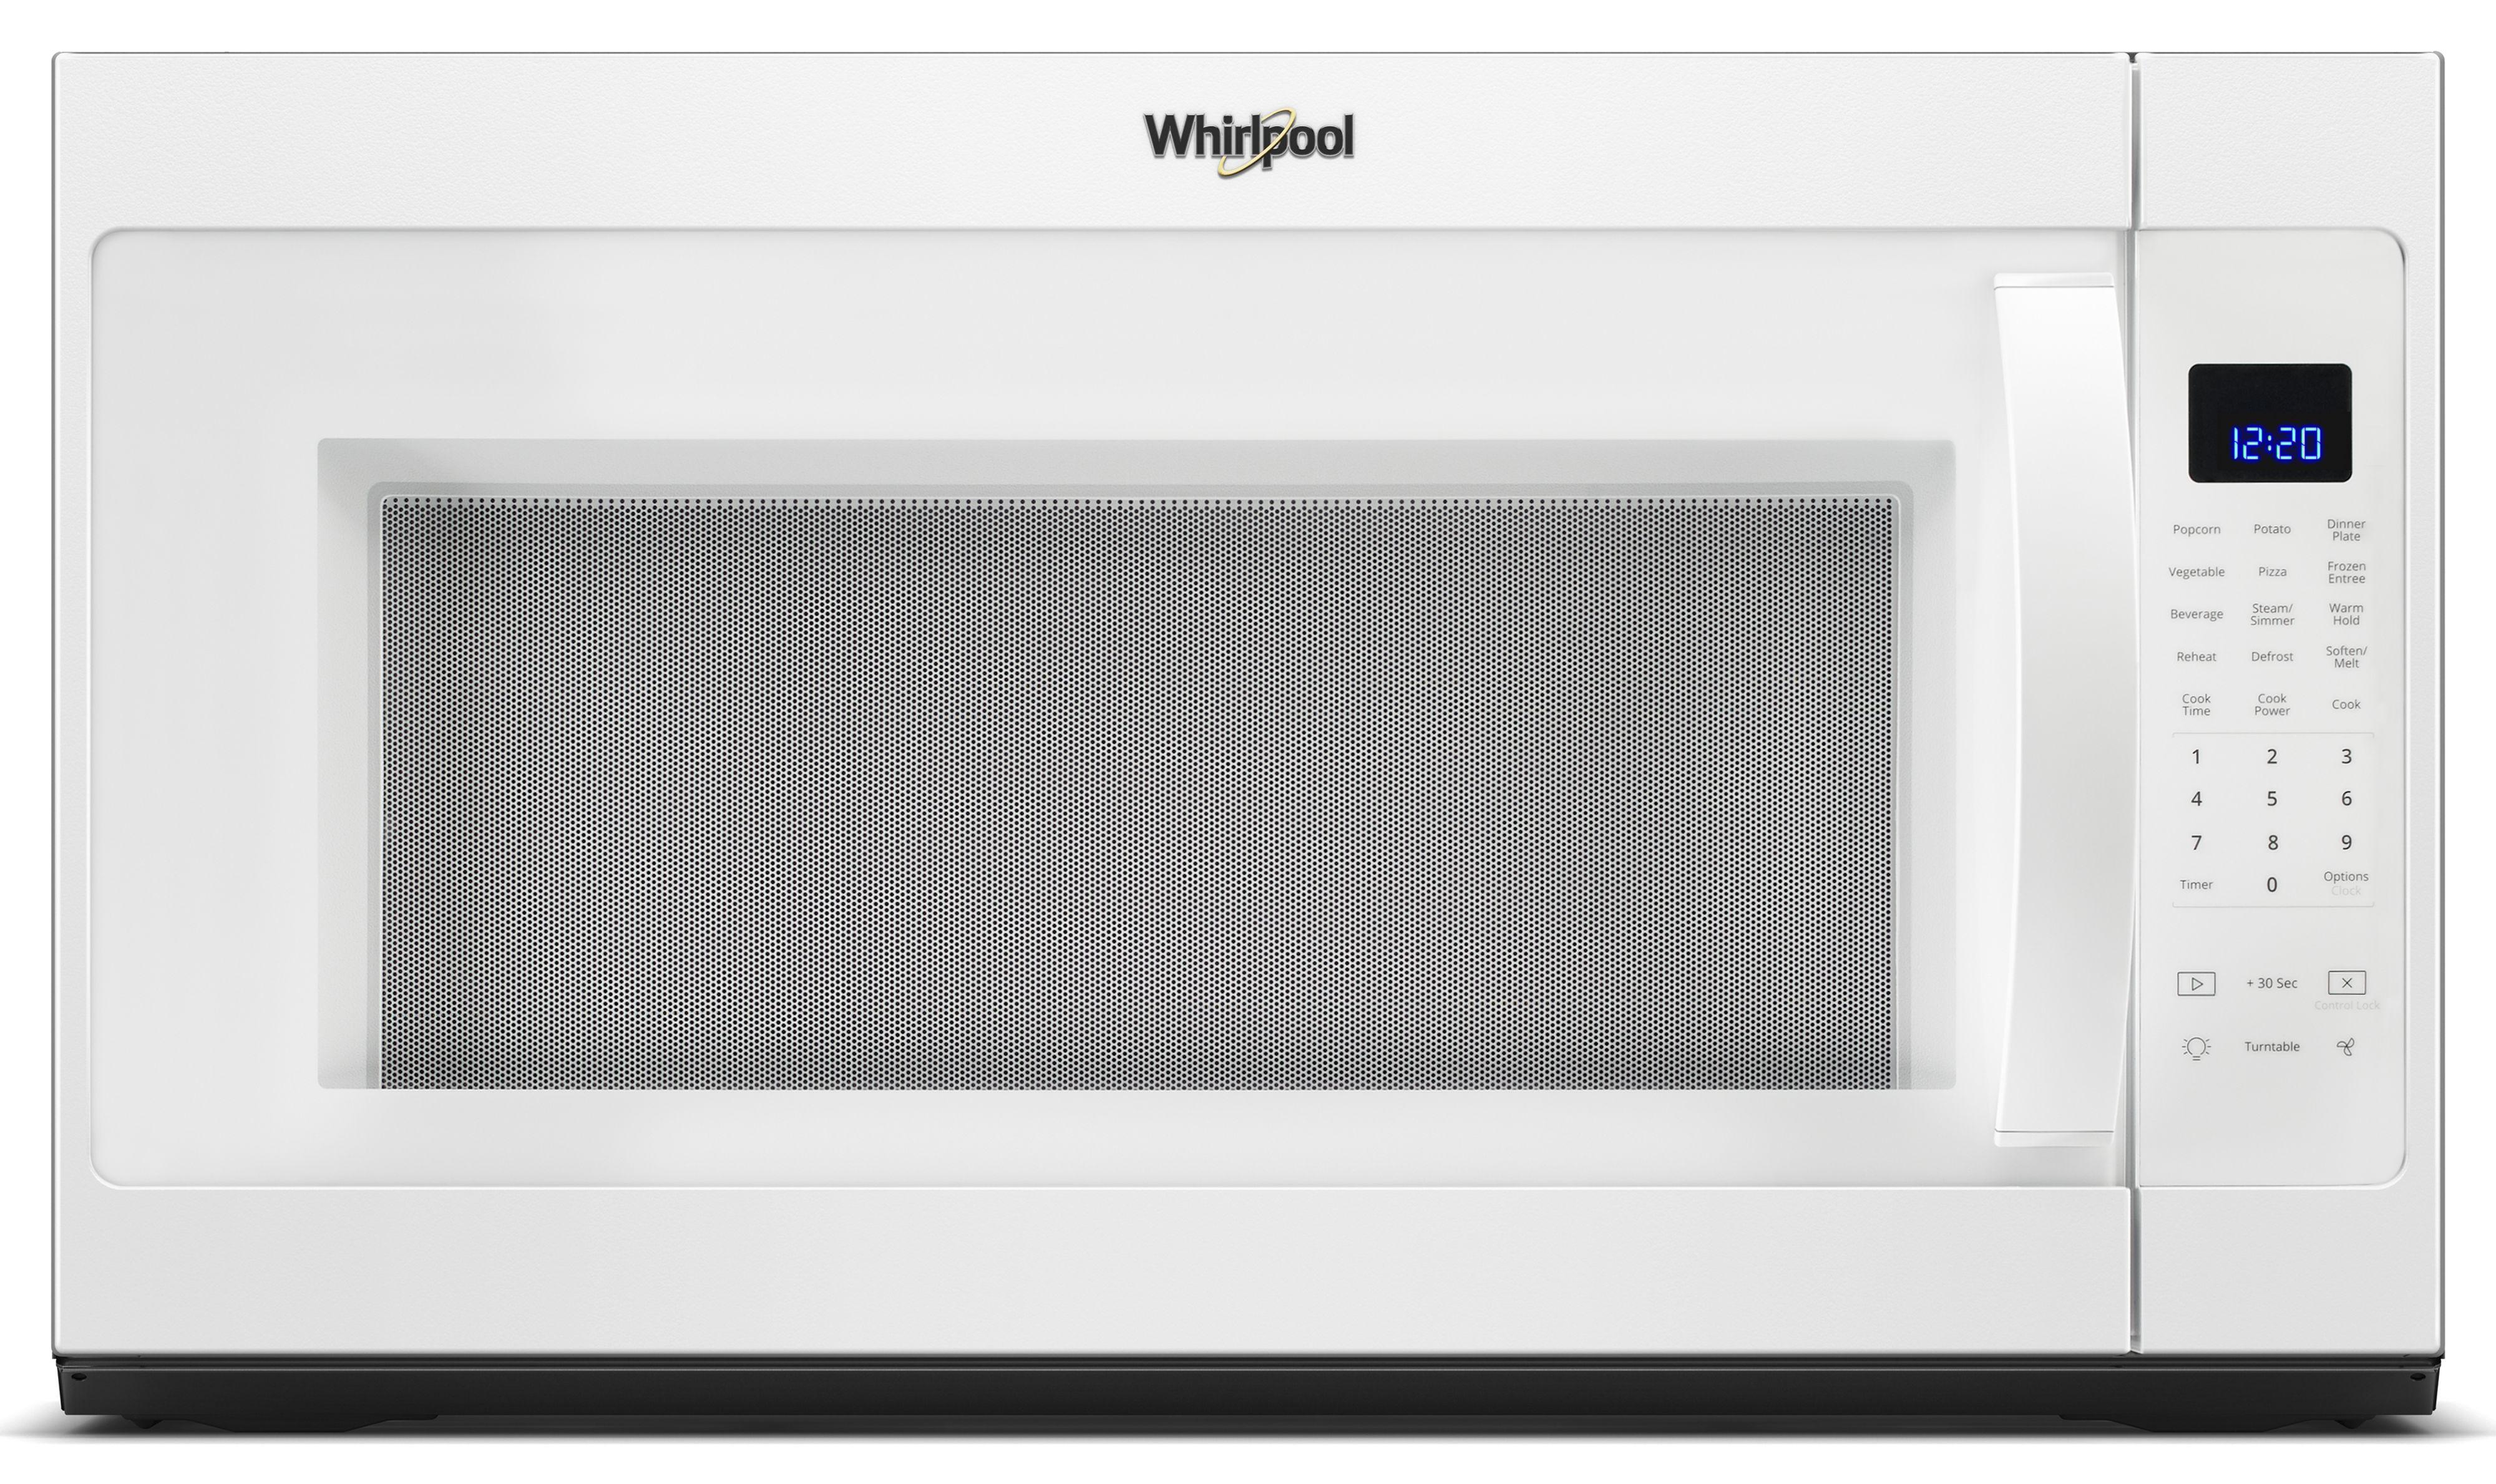 Whirlpool WMH53521HW 30 Inch Over the Range Microwave Oven with 2.1 cu